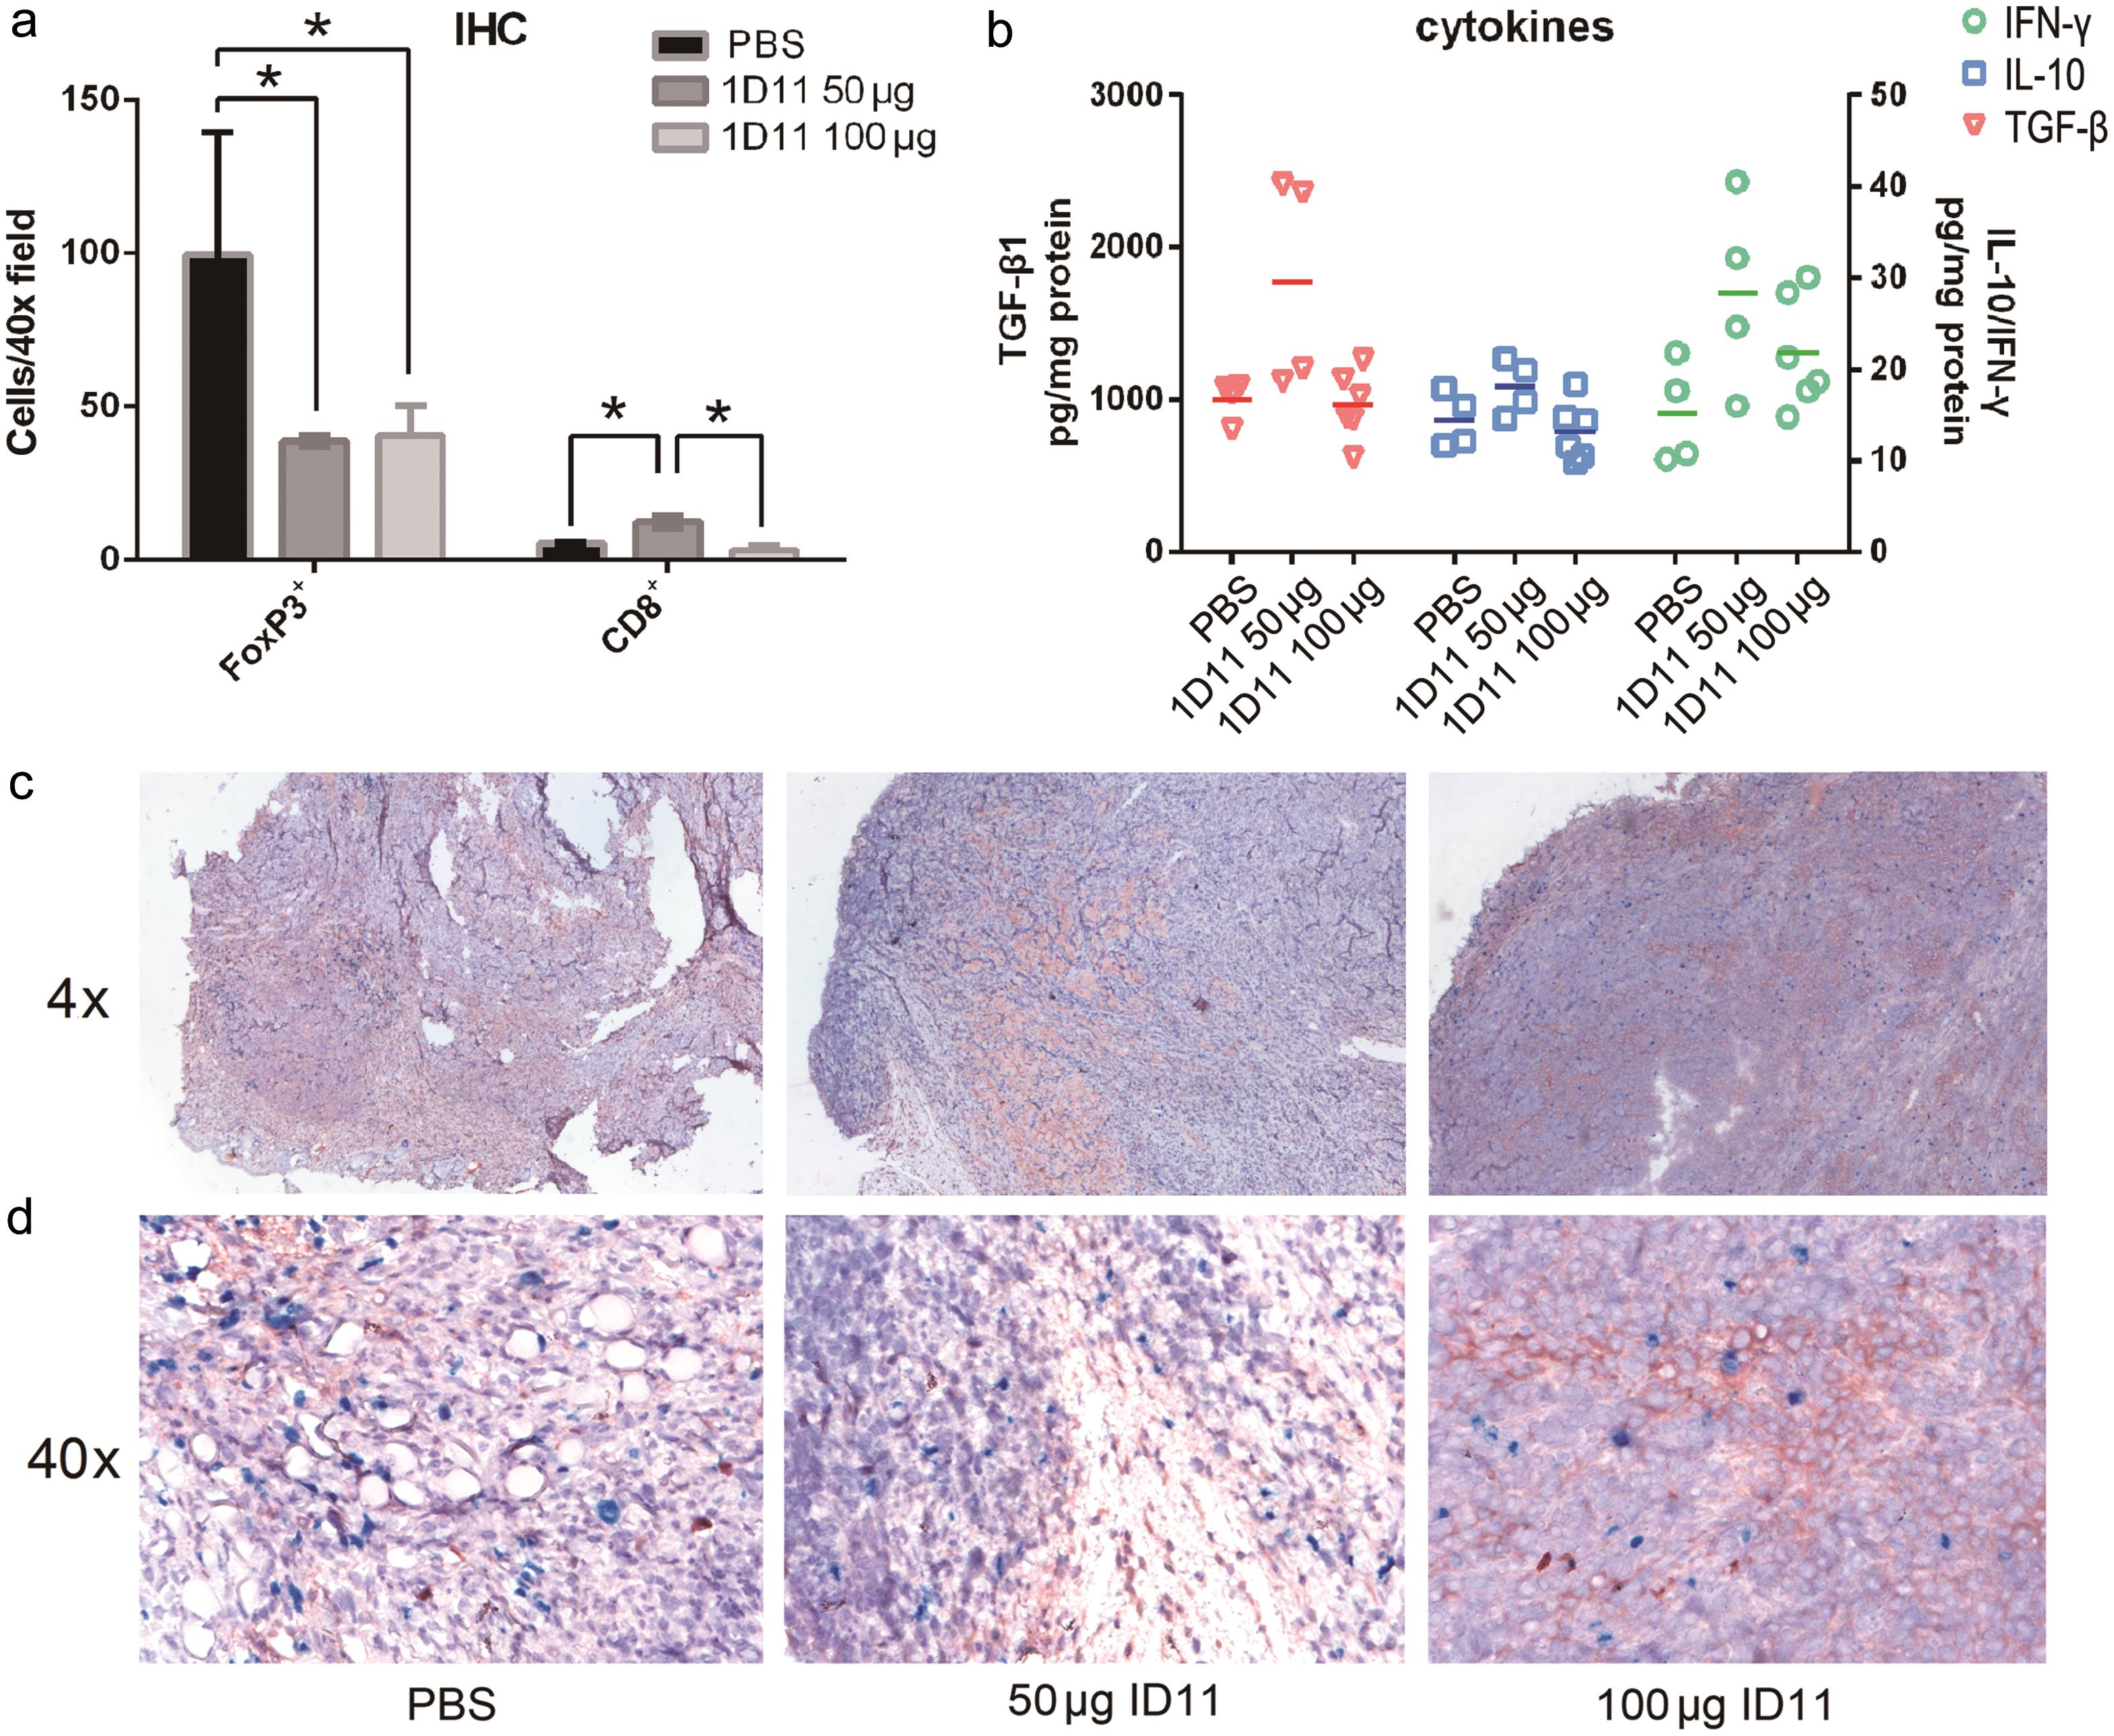 Variations in tumor infiltrating Tregs, Tc and typical cytokines after TGF-β blockade.